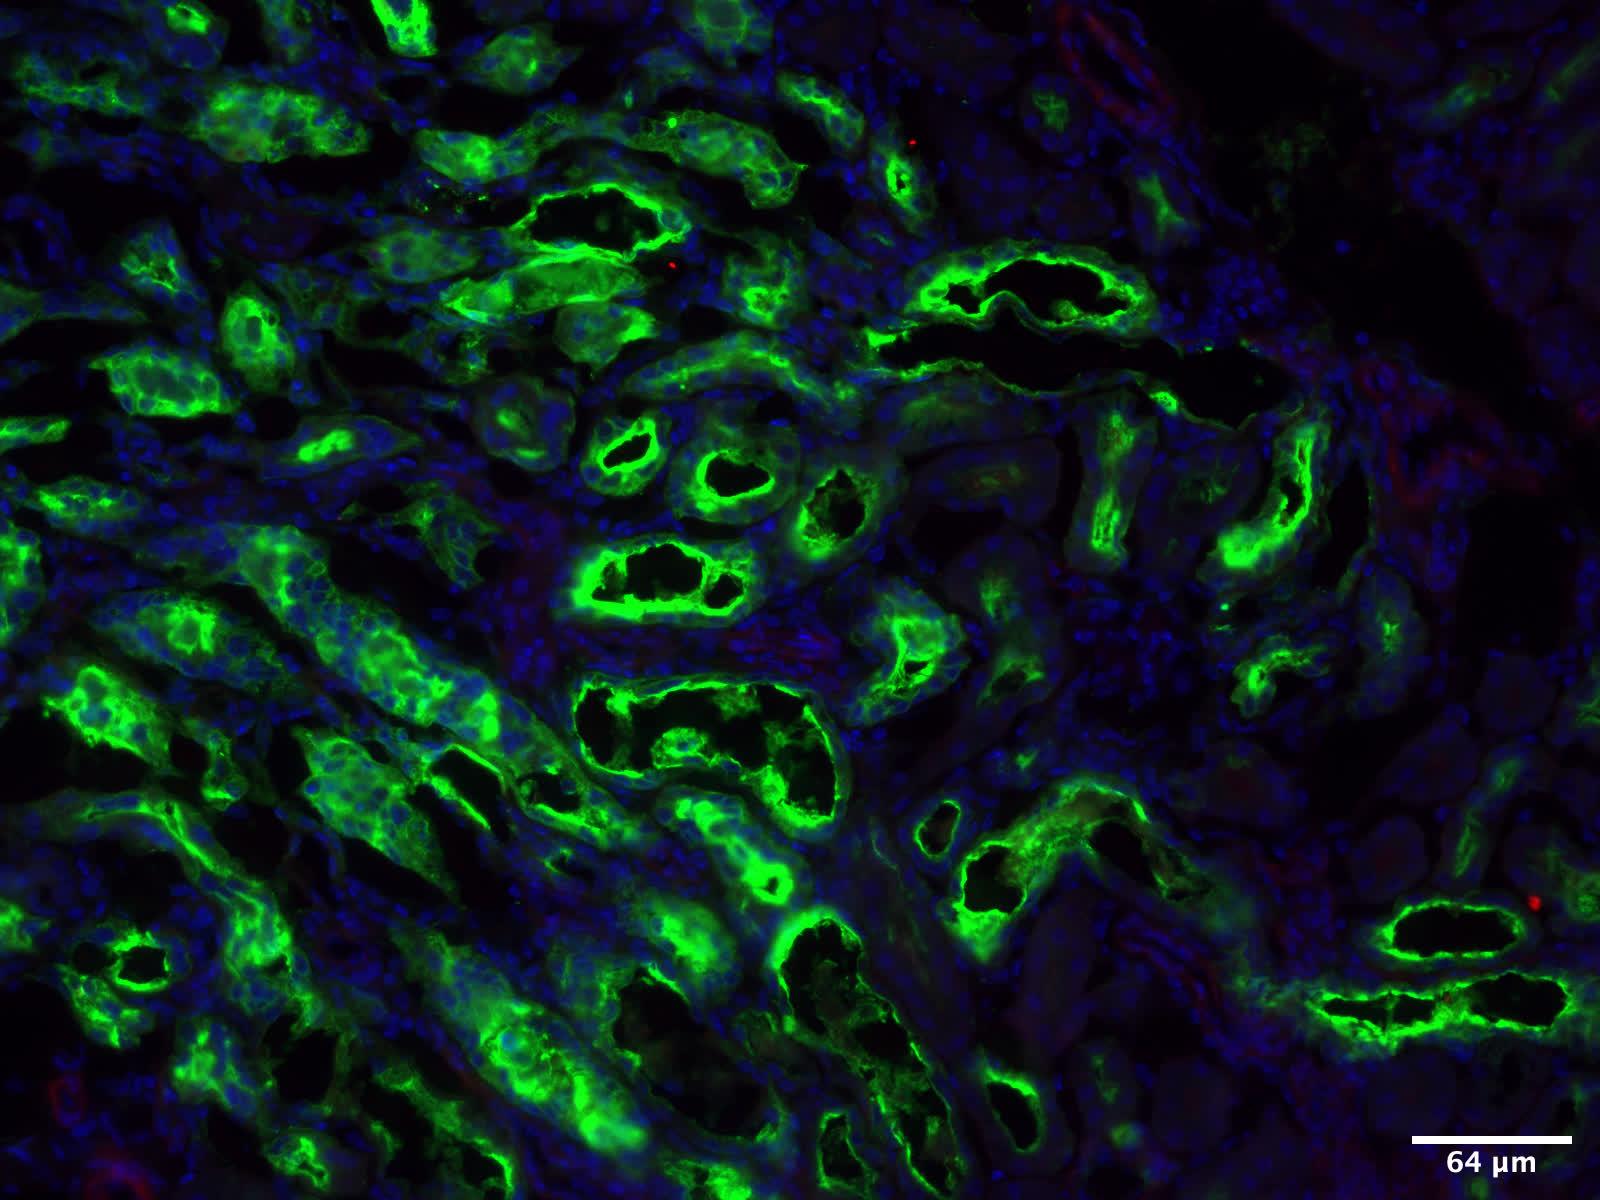 Cross-section of an injured kidney expressing KIM-1 (green) in the tubules.